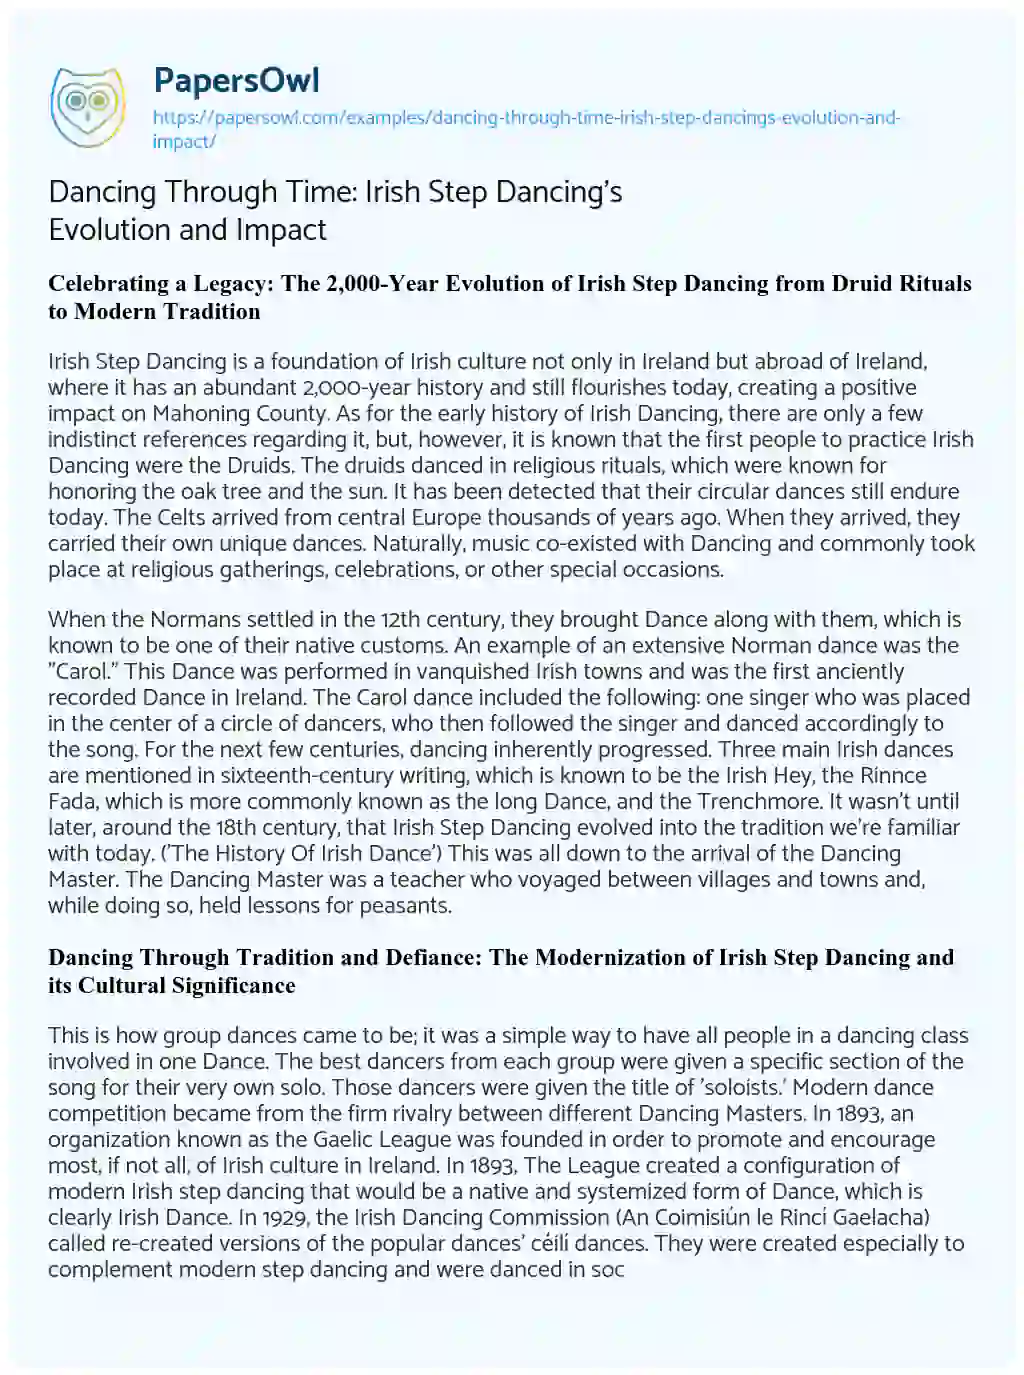 Essay on Dancing through Time: Irish Step Dancing’s Evolution and Impact